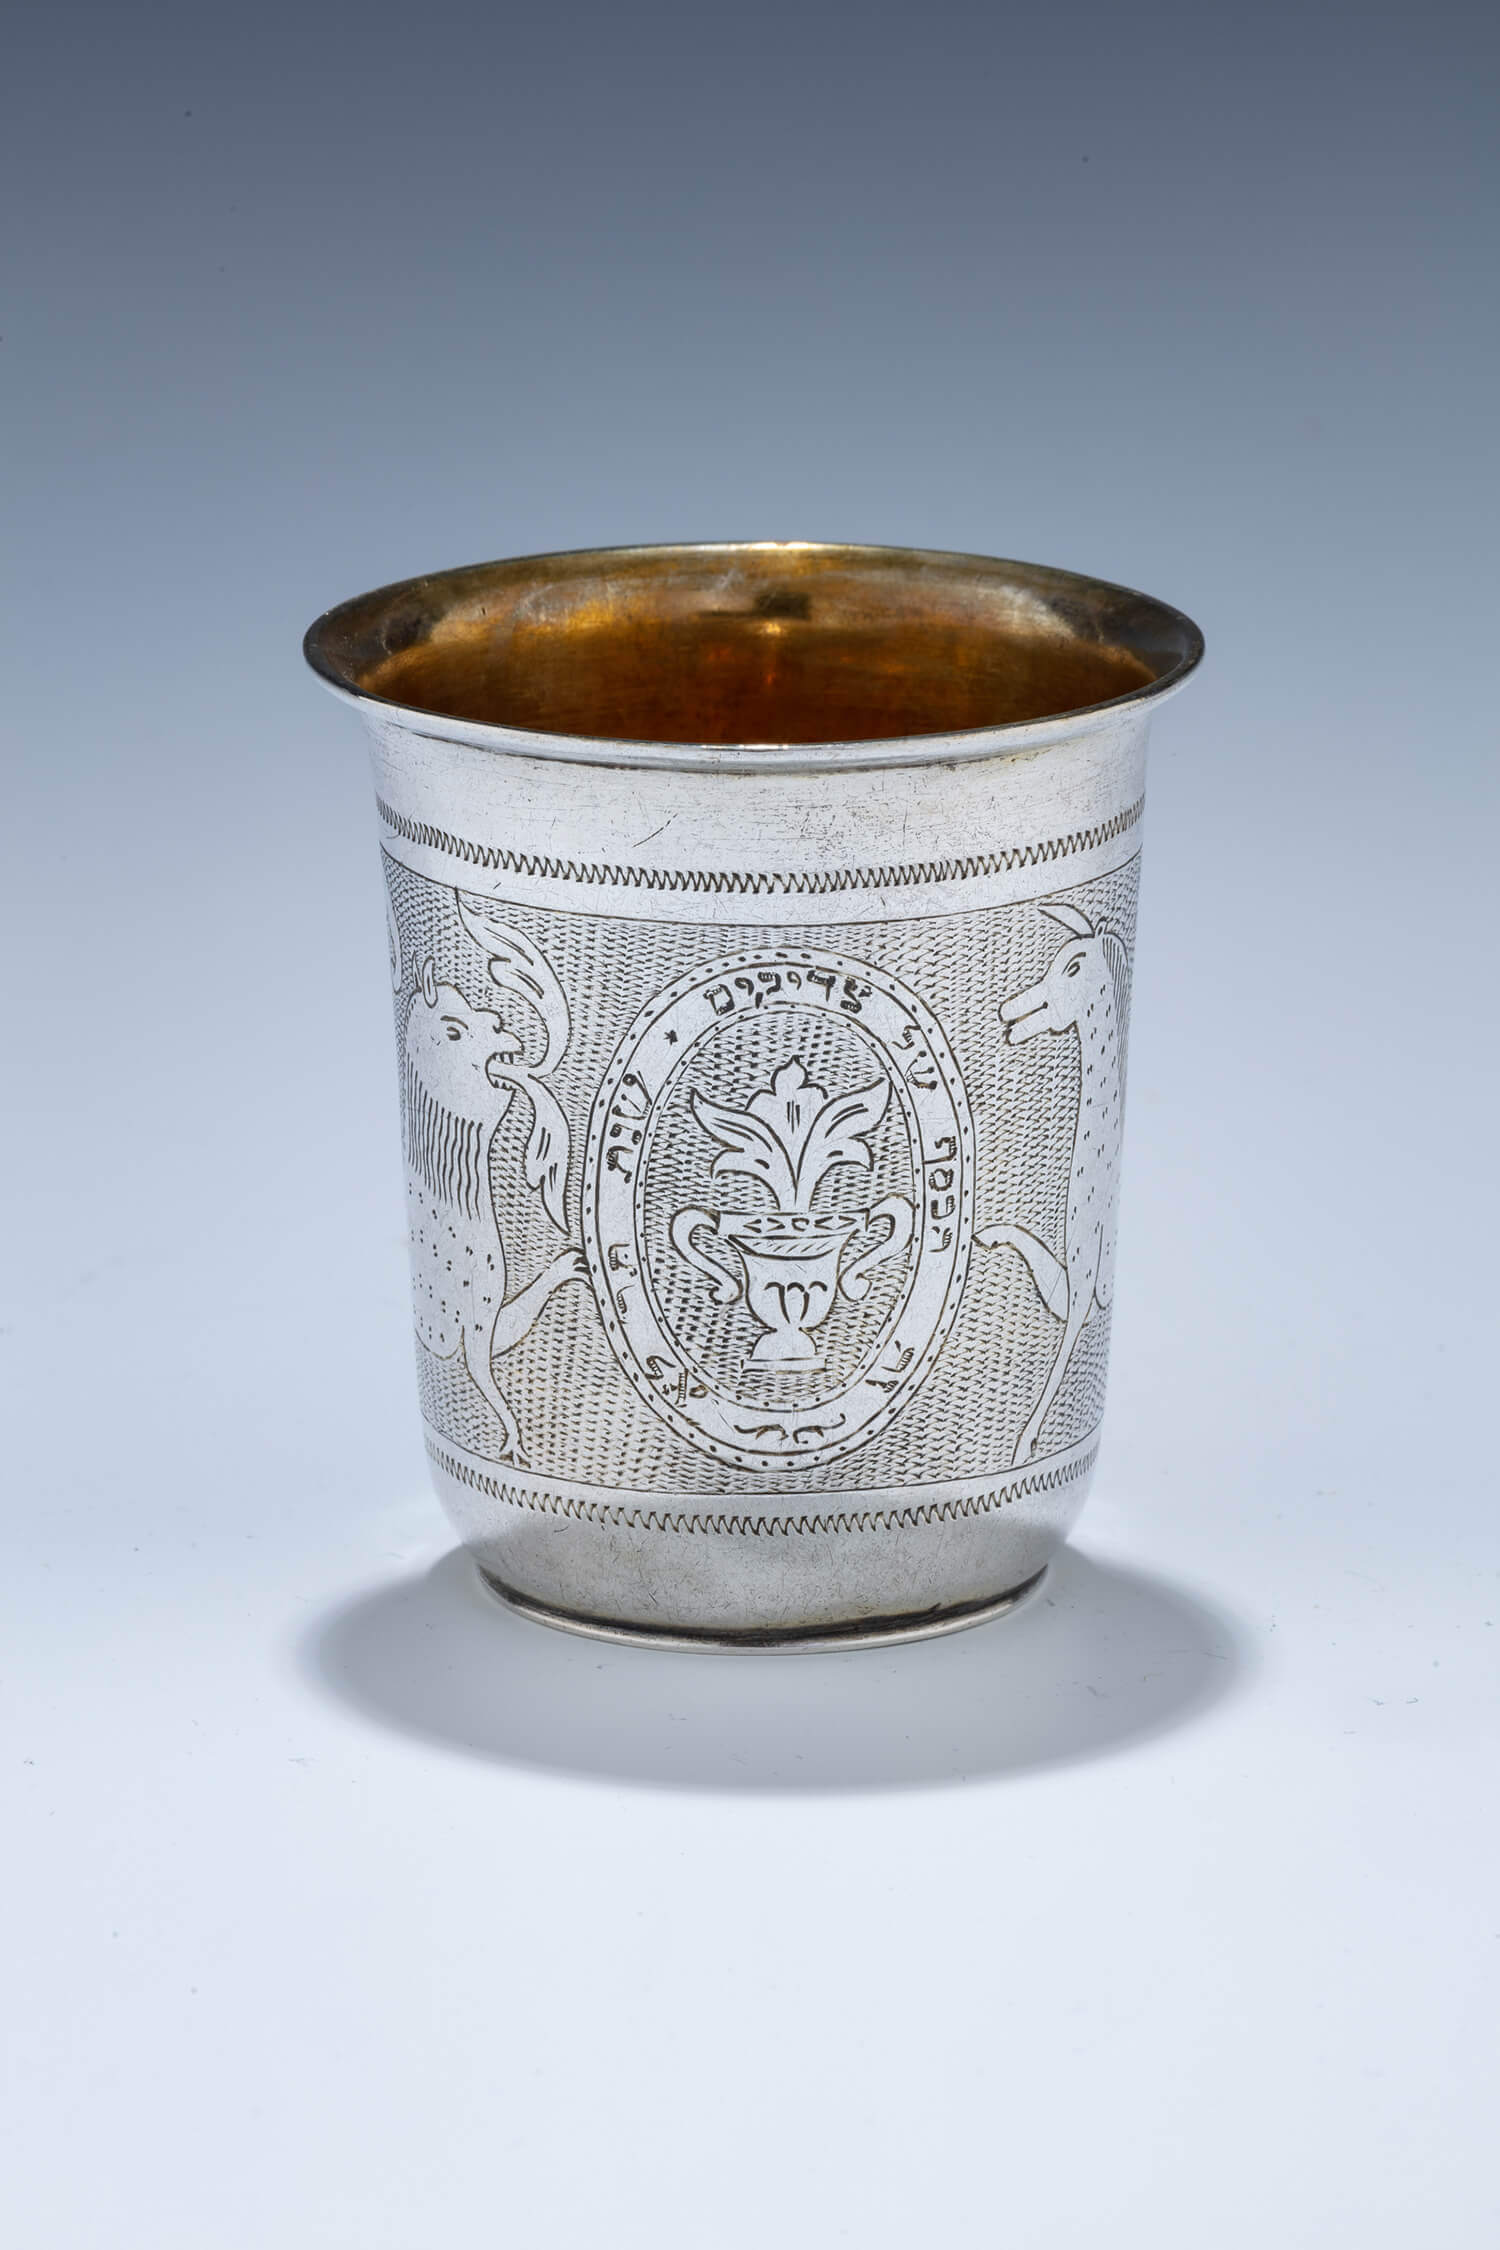 150. A LARGE AND RARE SILVER SHMIROTH KIDDUSH CUP